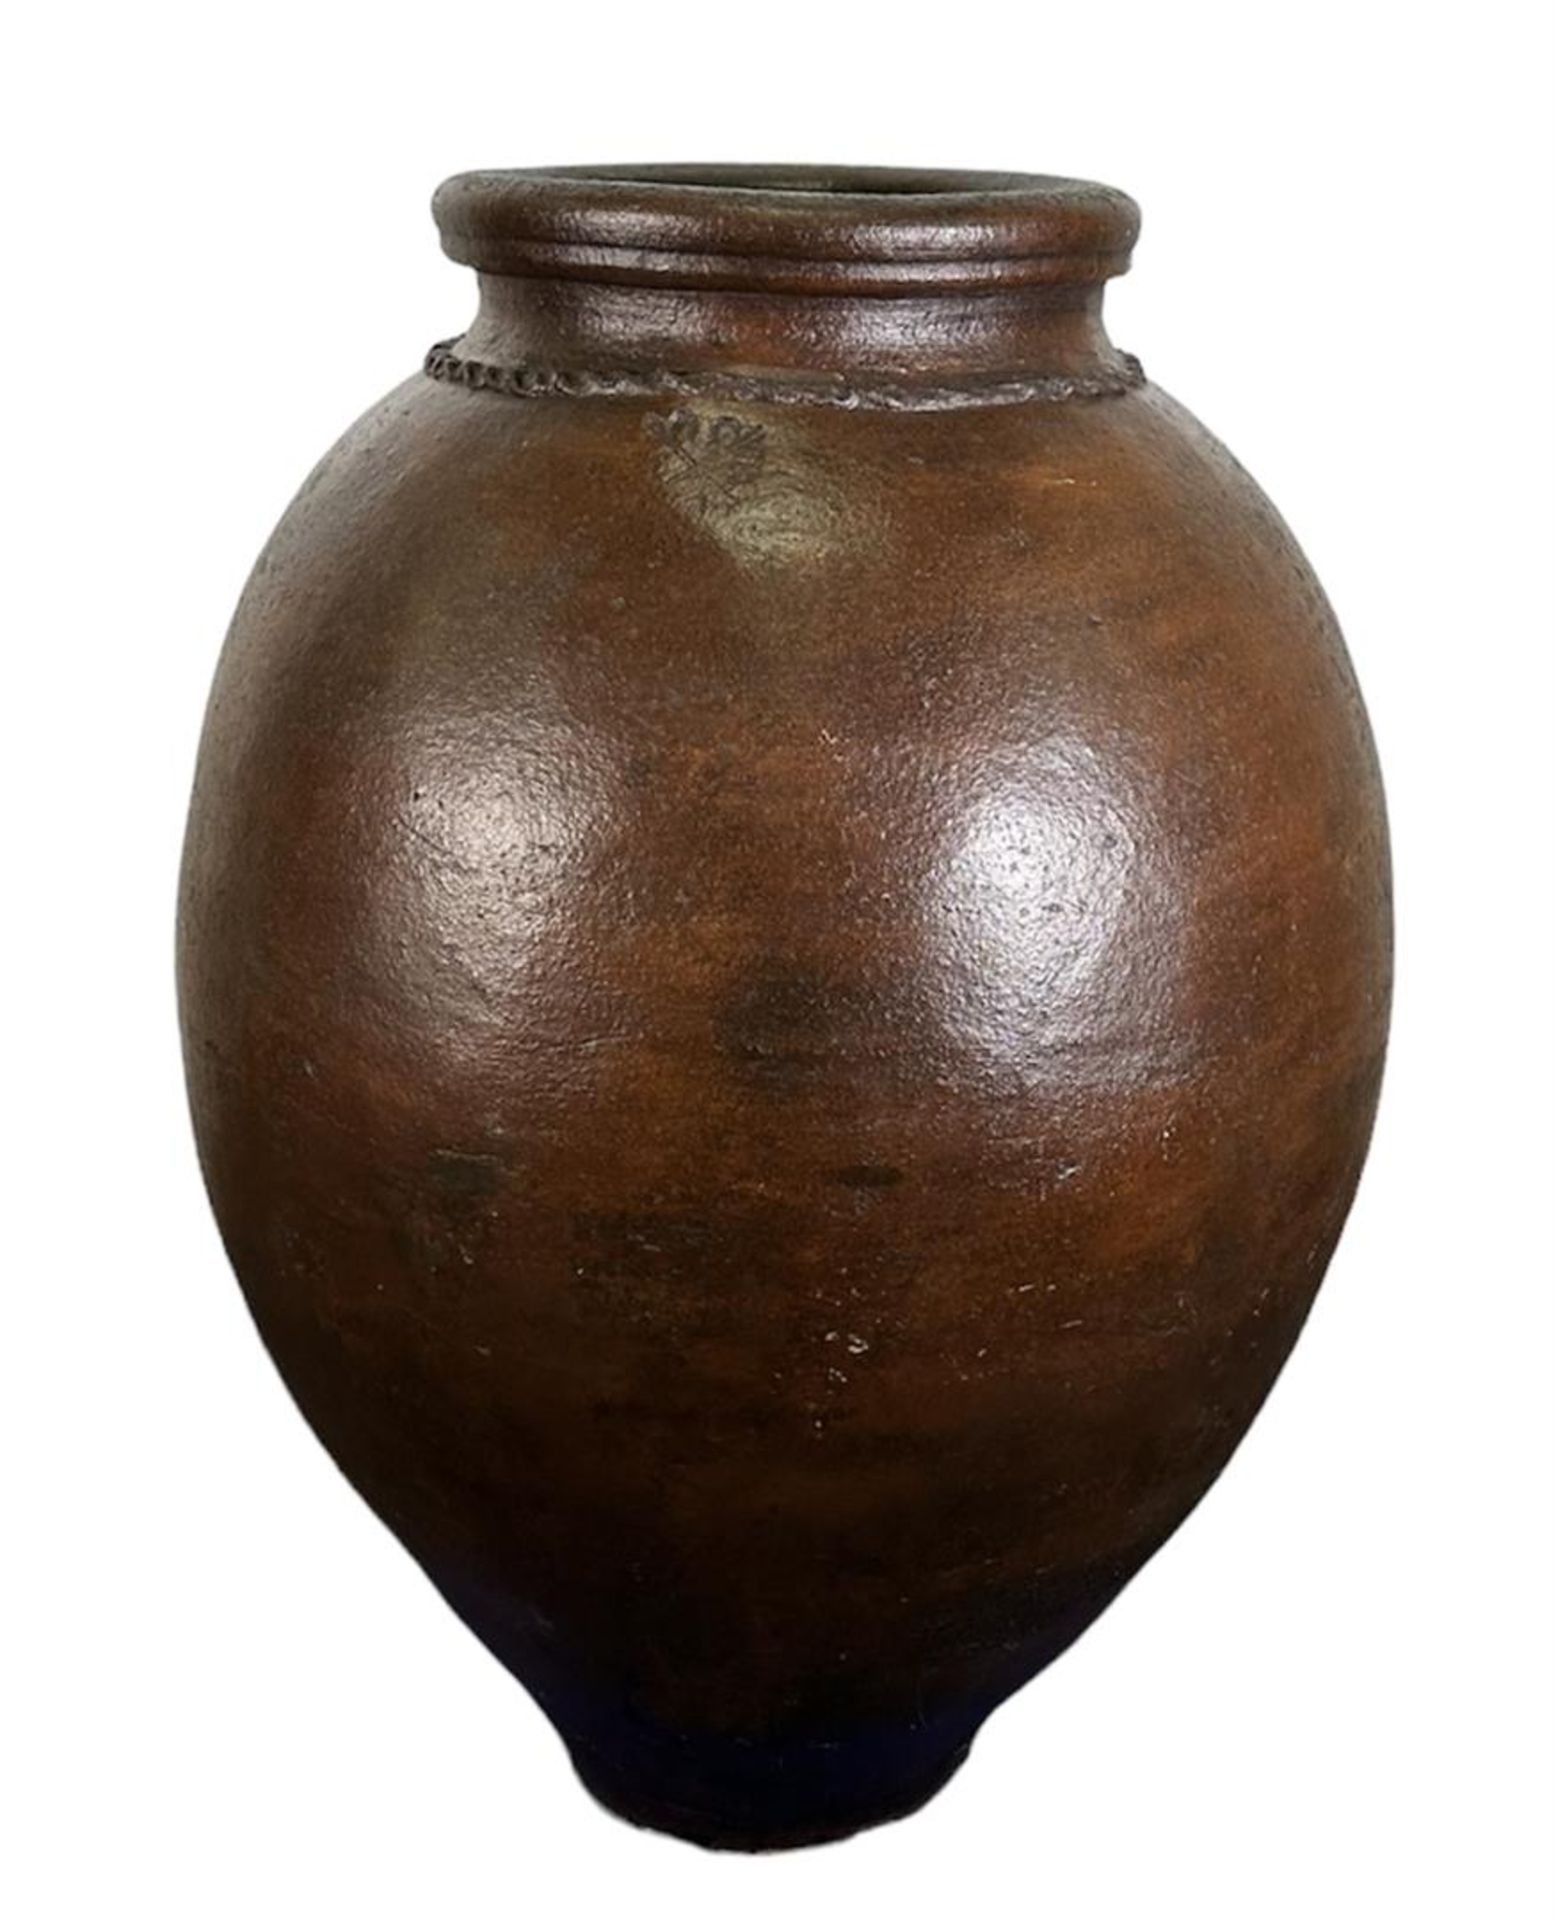 A large Mediterranean antique, earthenware/terra cotta cistern for wine or oil. With unclear mark on